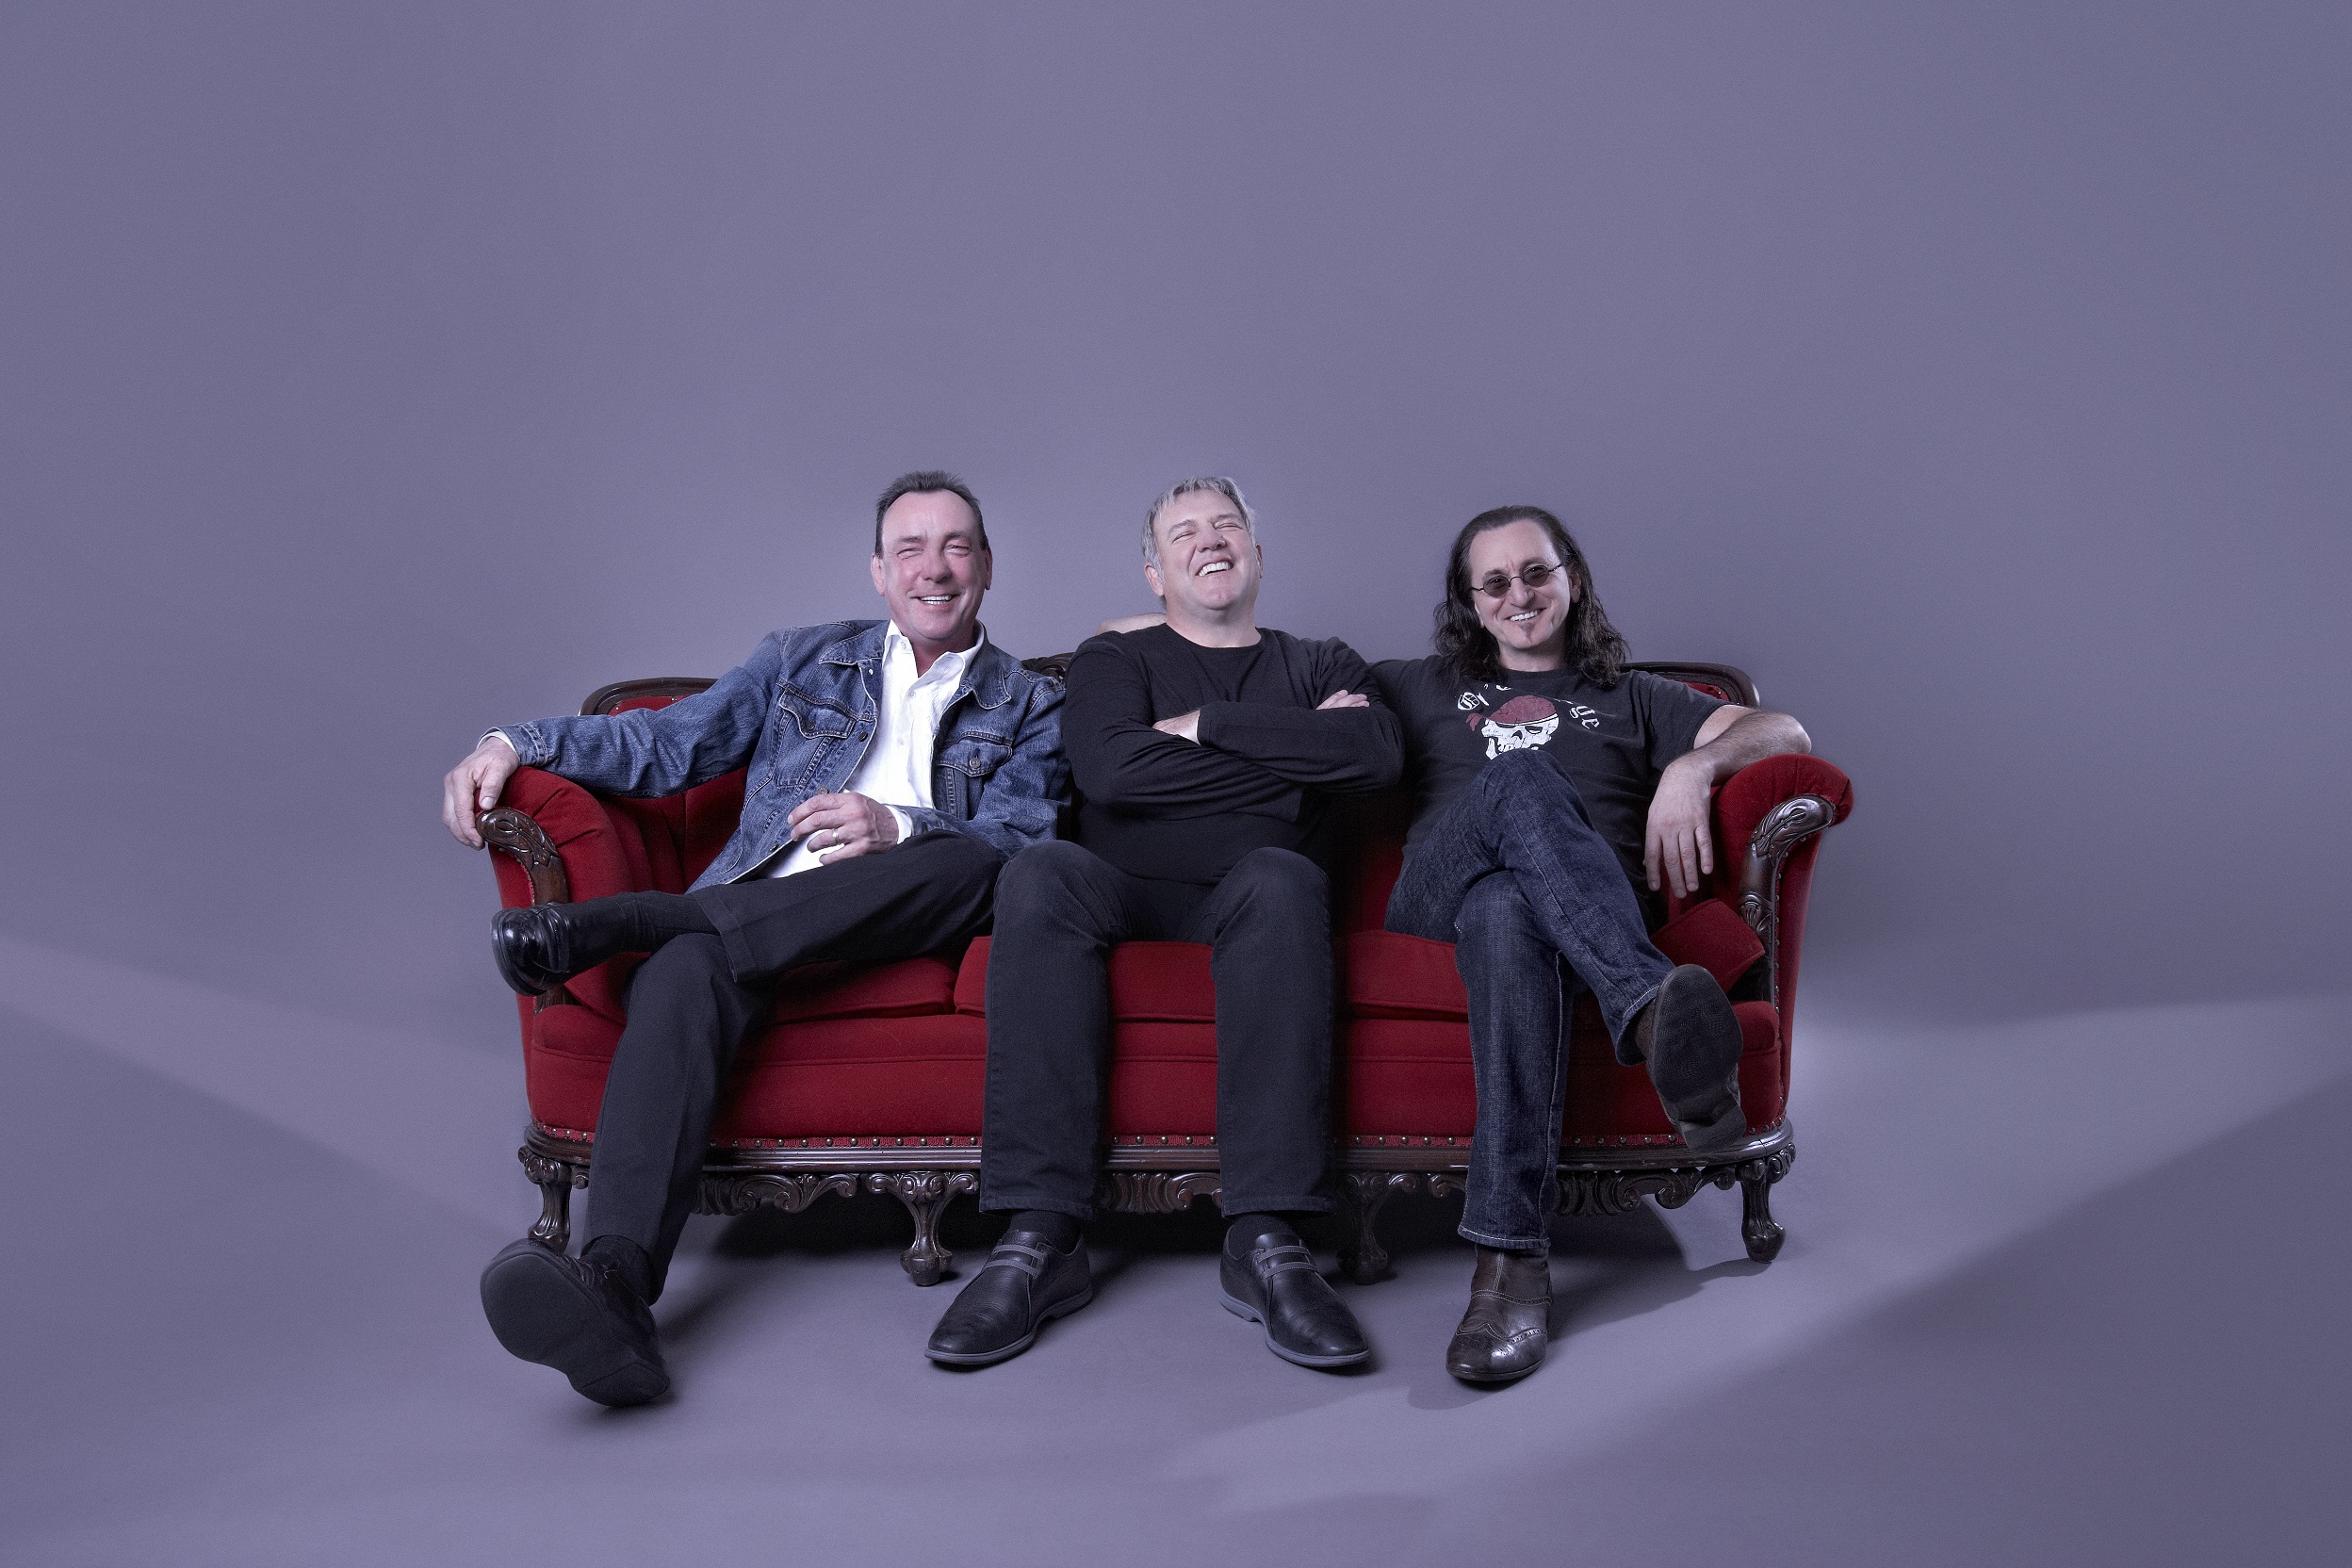 RUSH Returns With ‘Clockwork Angels’ First Album in Five Years